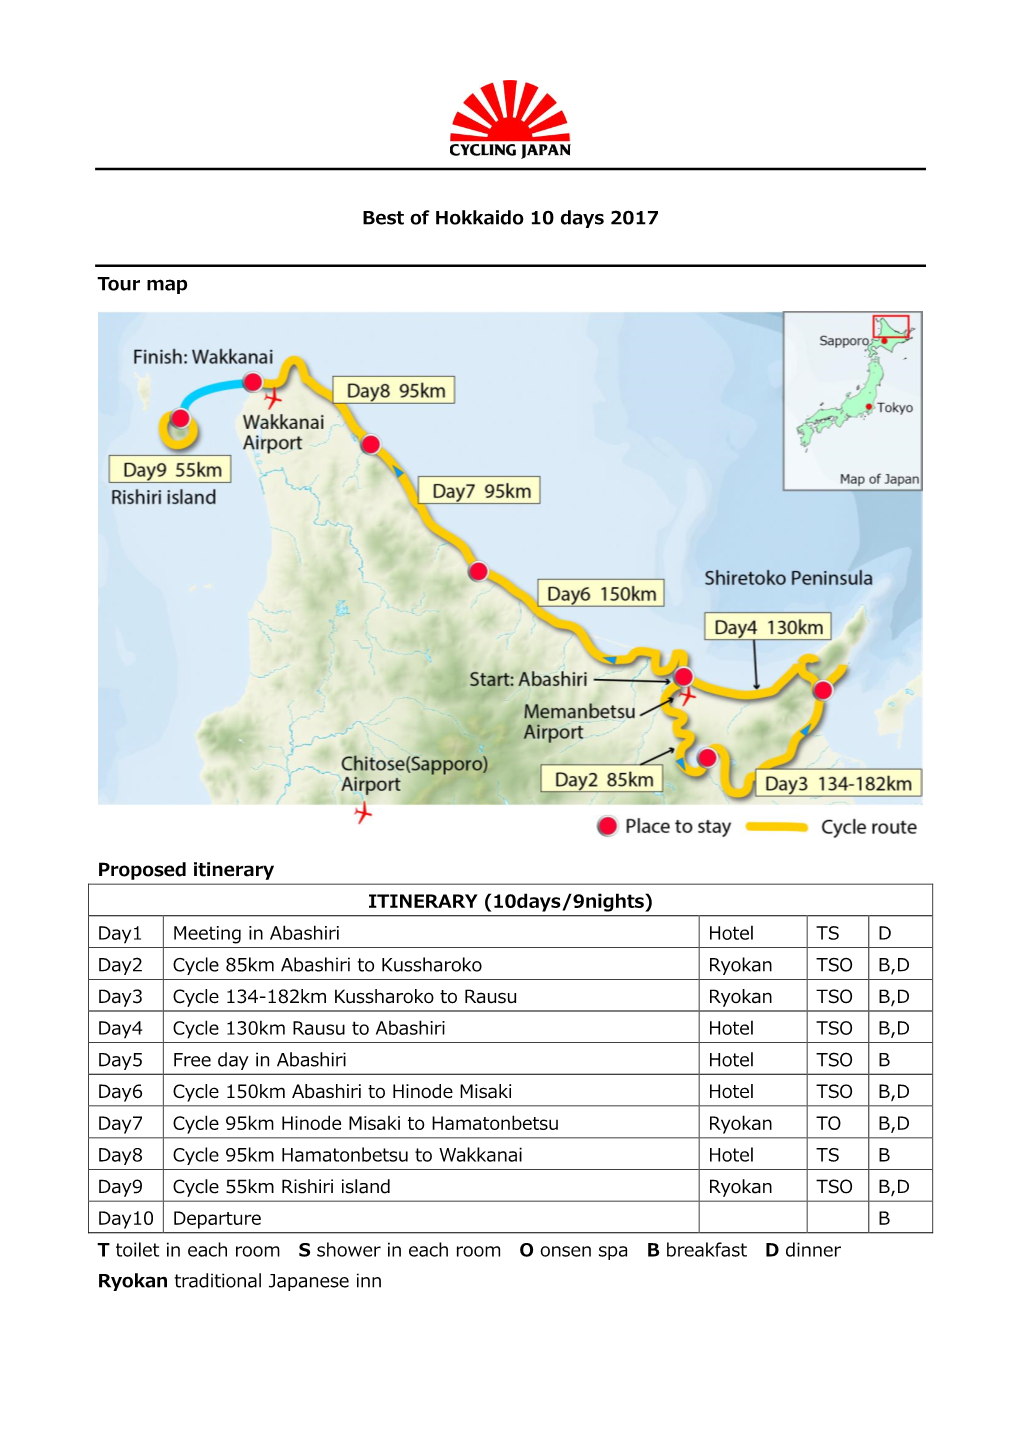 Best of Hokkaido 10 Days 2017 Tour Map Proposed